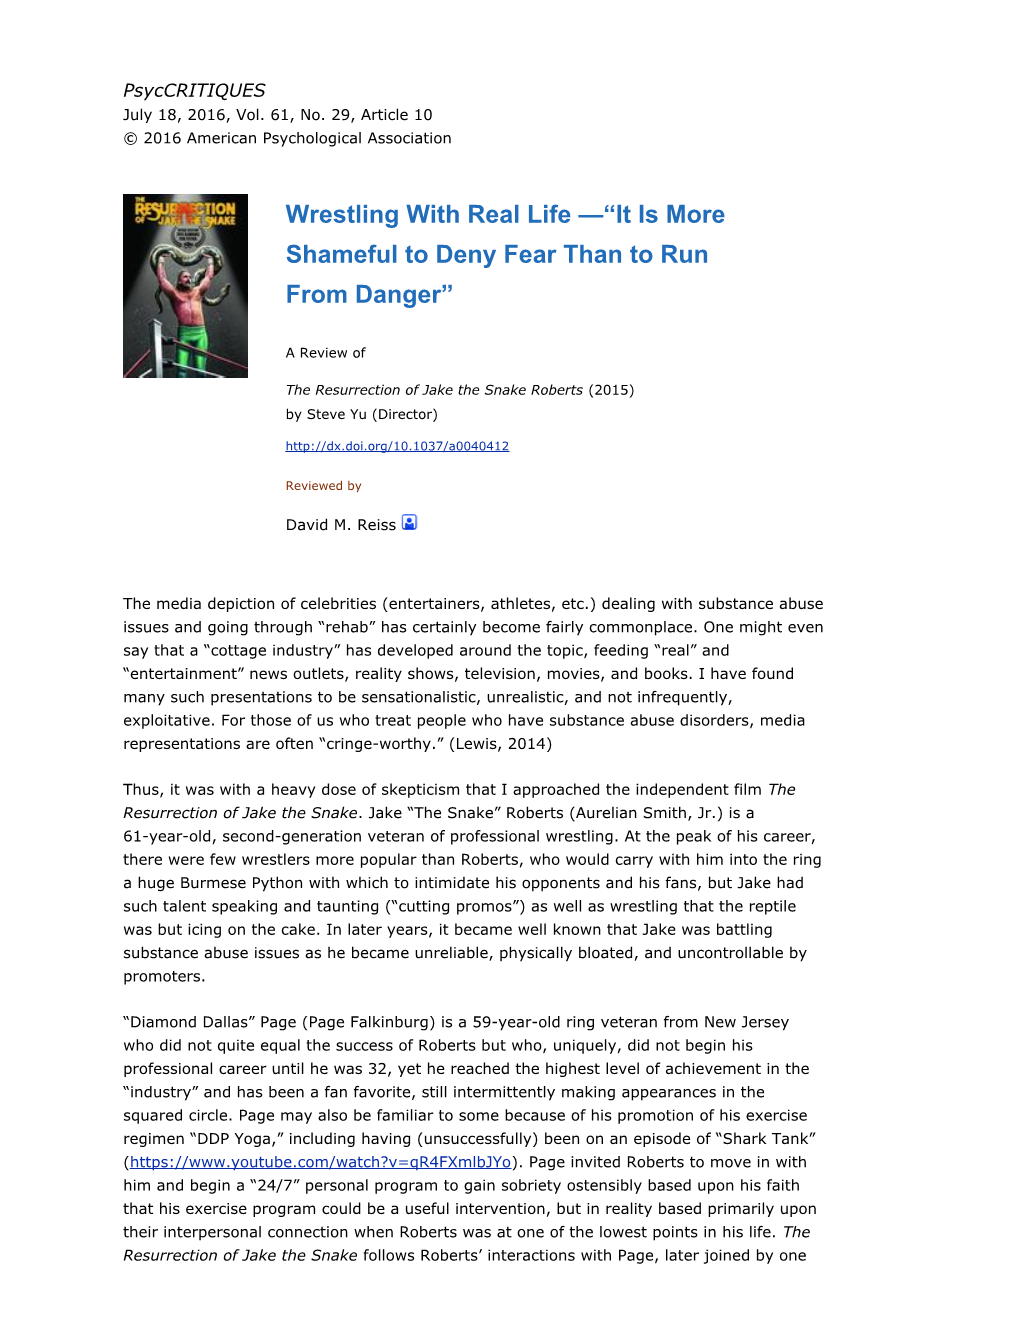 Wrestling with Real Life —“It Is More Shameful to Deny Fear Than to Run from Danger”